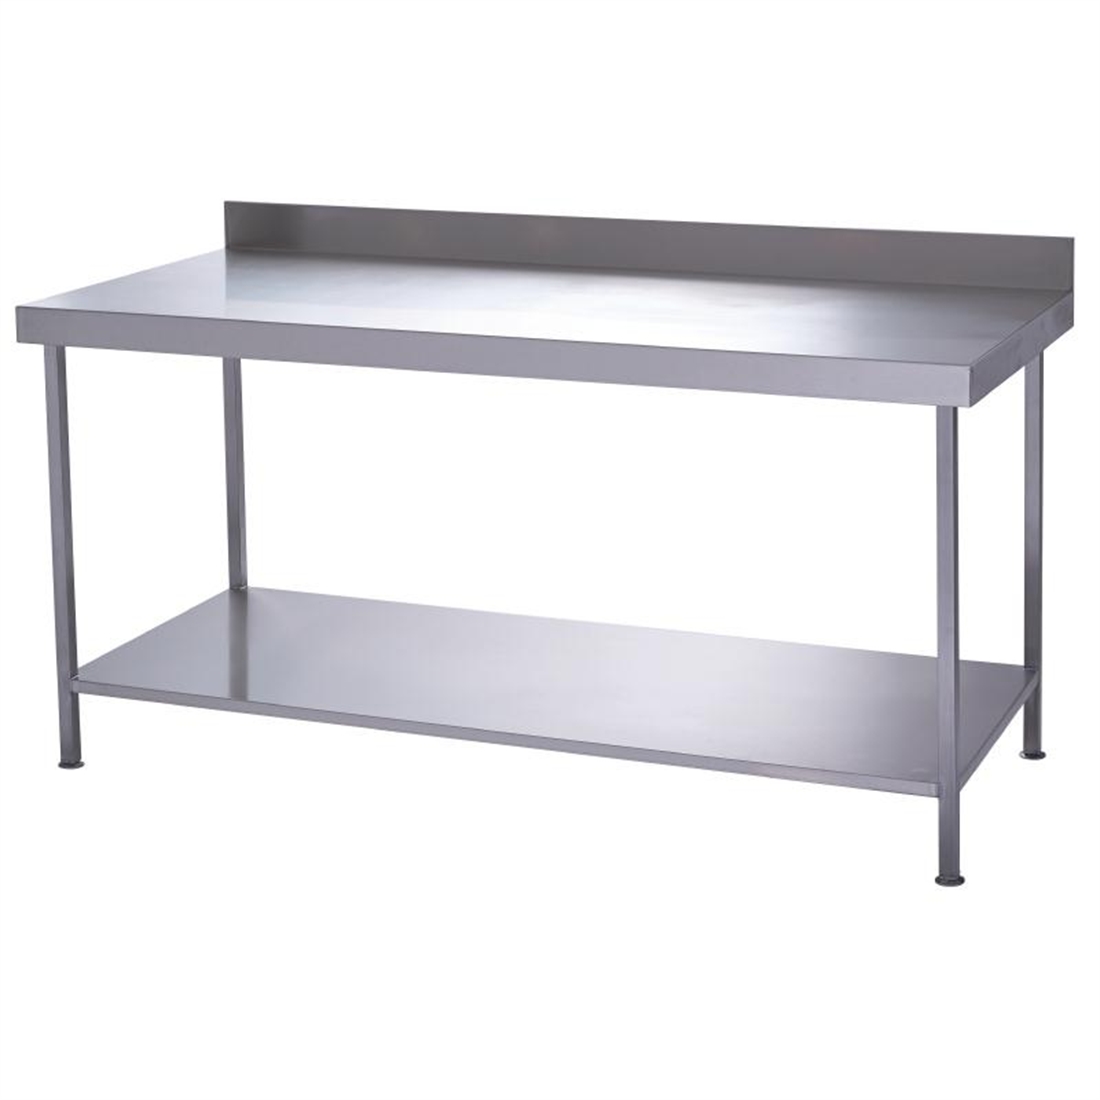 Parry Fully Welded Stainless Steel Wall Table with Undershelf 900x600mm